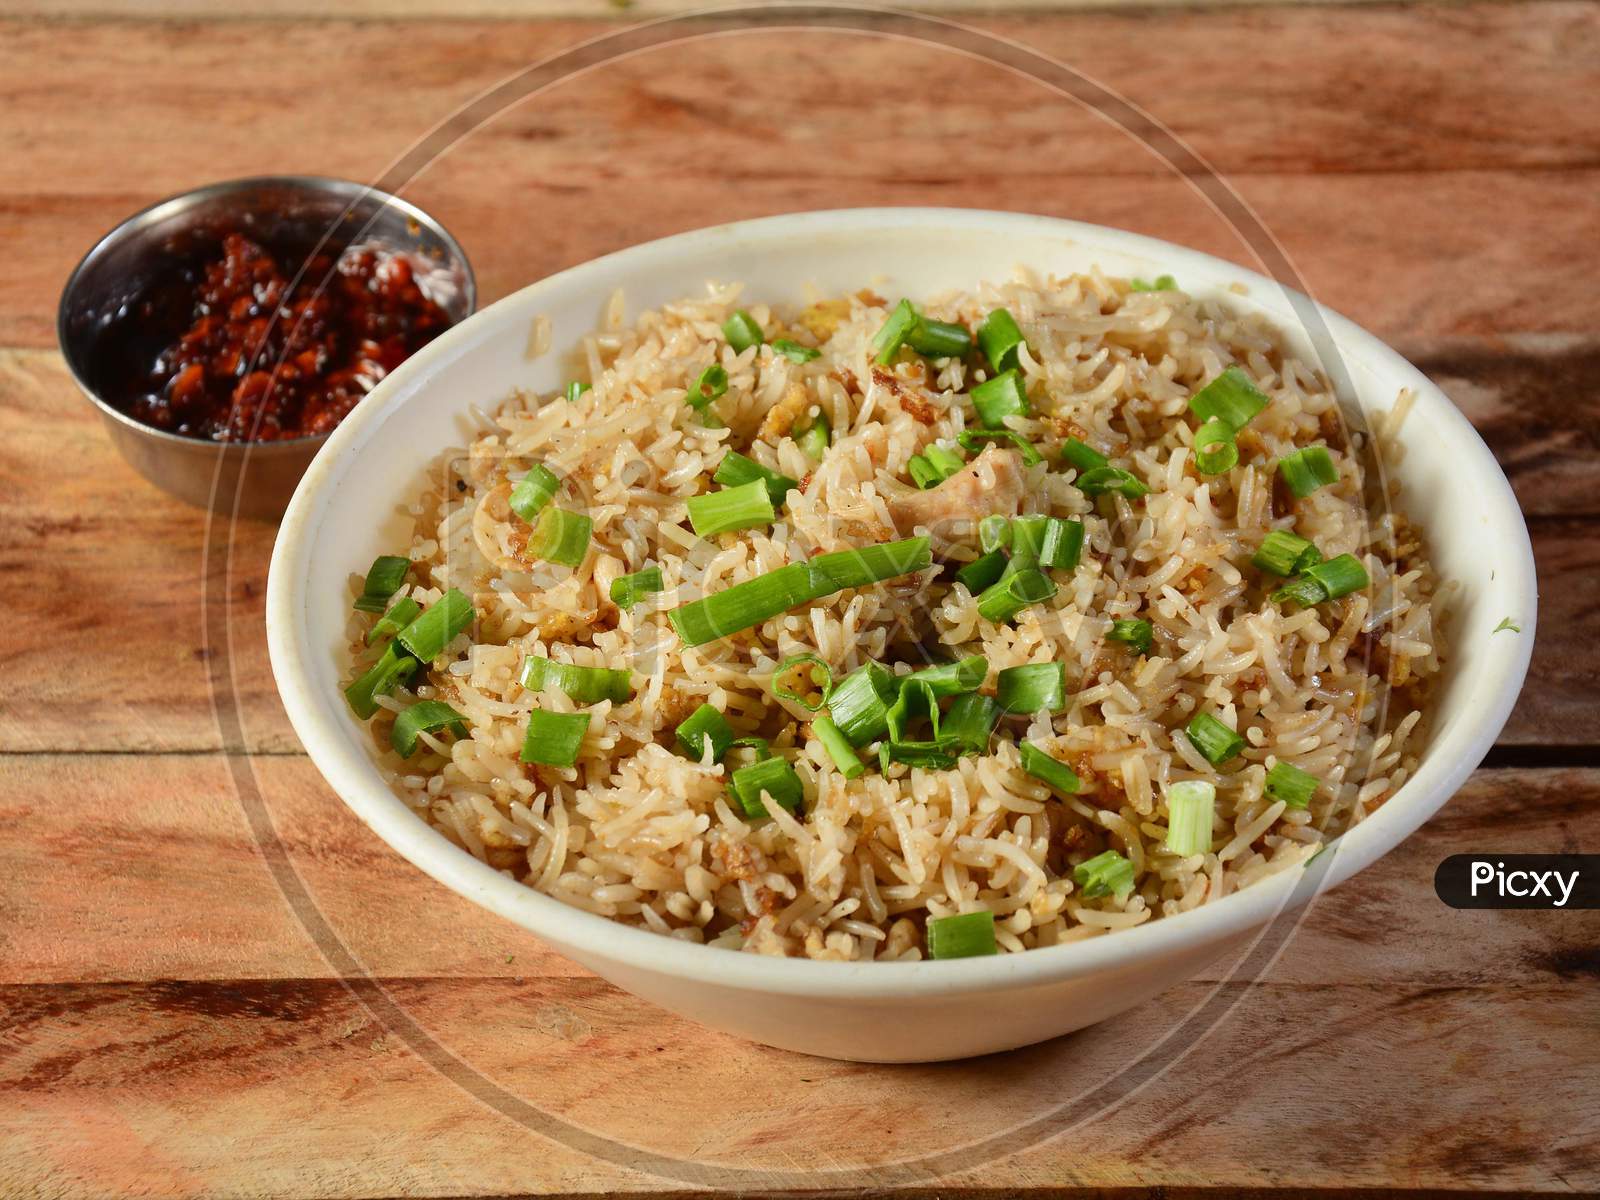 Indian Cuisine Healthy And Tasty Chicken Fried Rice With Tomato Sauce Served In White Bowl Over A Rustic Wooden Background, Selective Focus